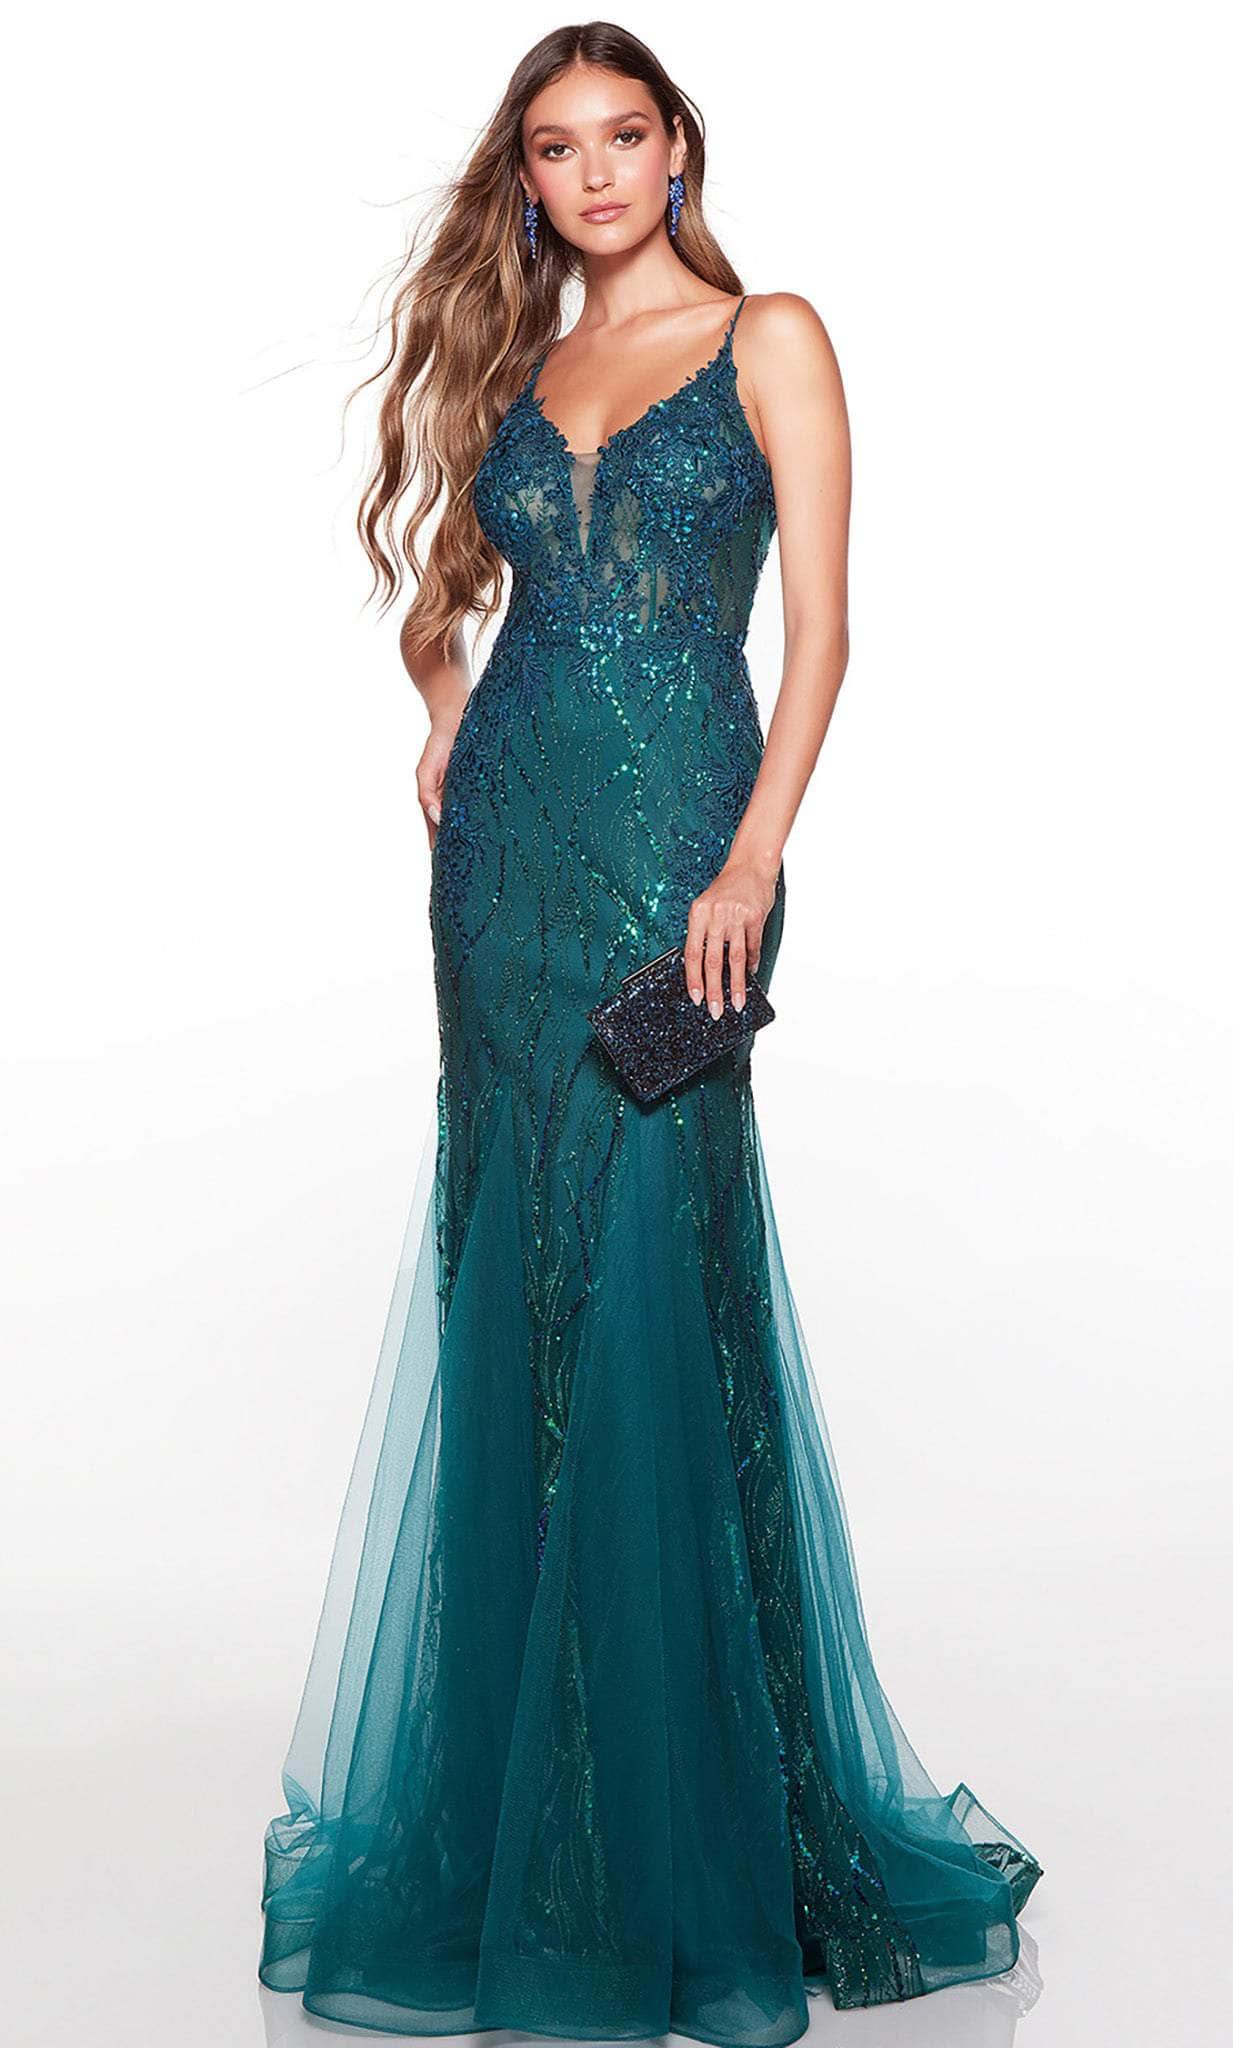 Alyce Paris 61419 - Embroidered Bodice Sleeveless Classic Prom Gown
